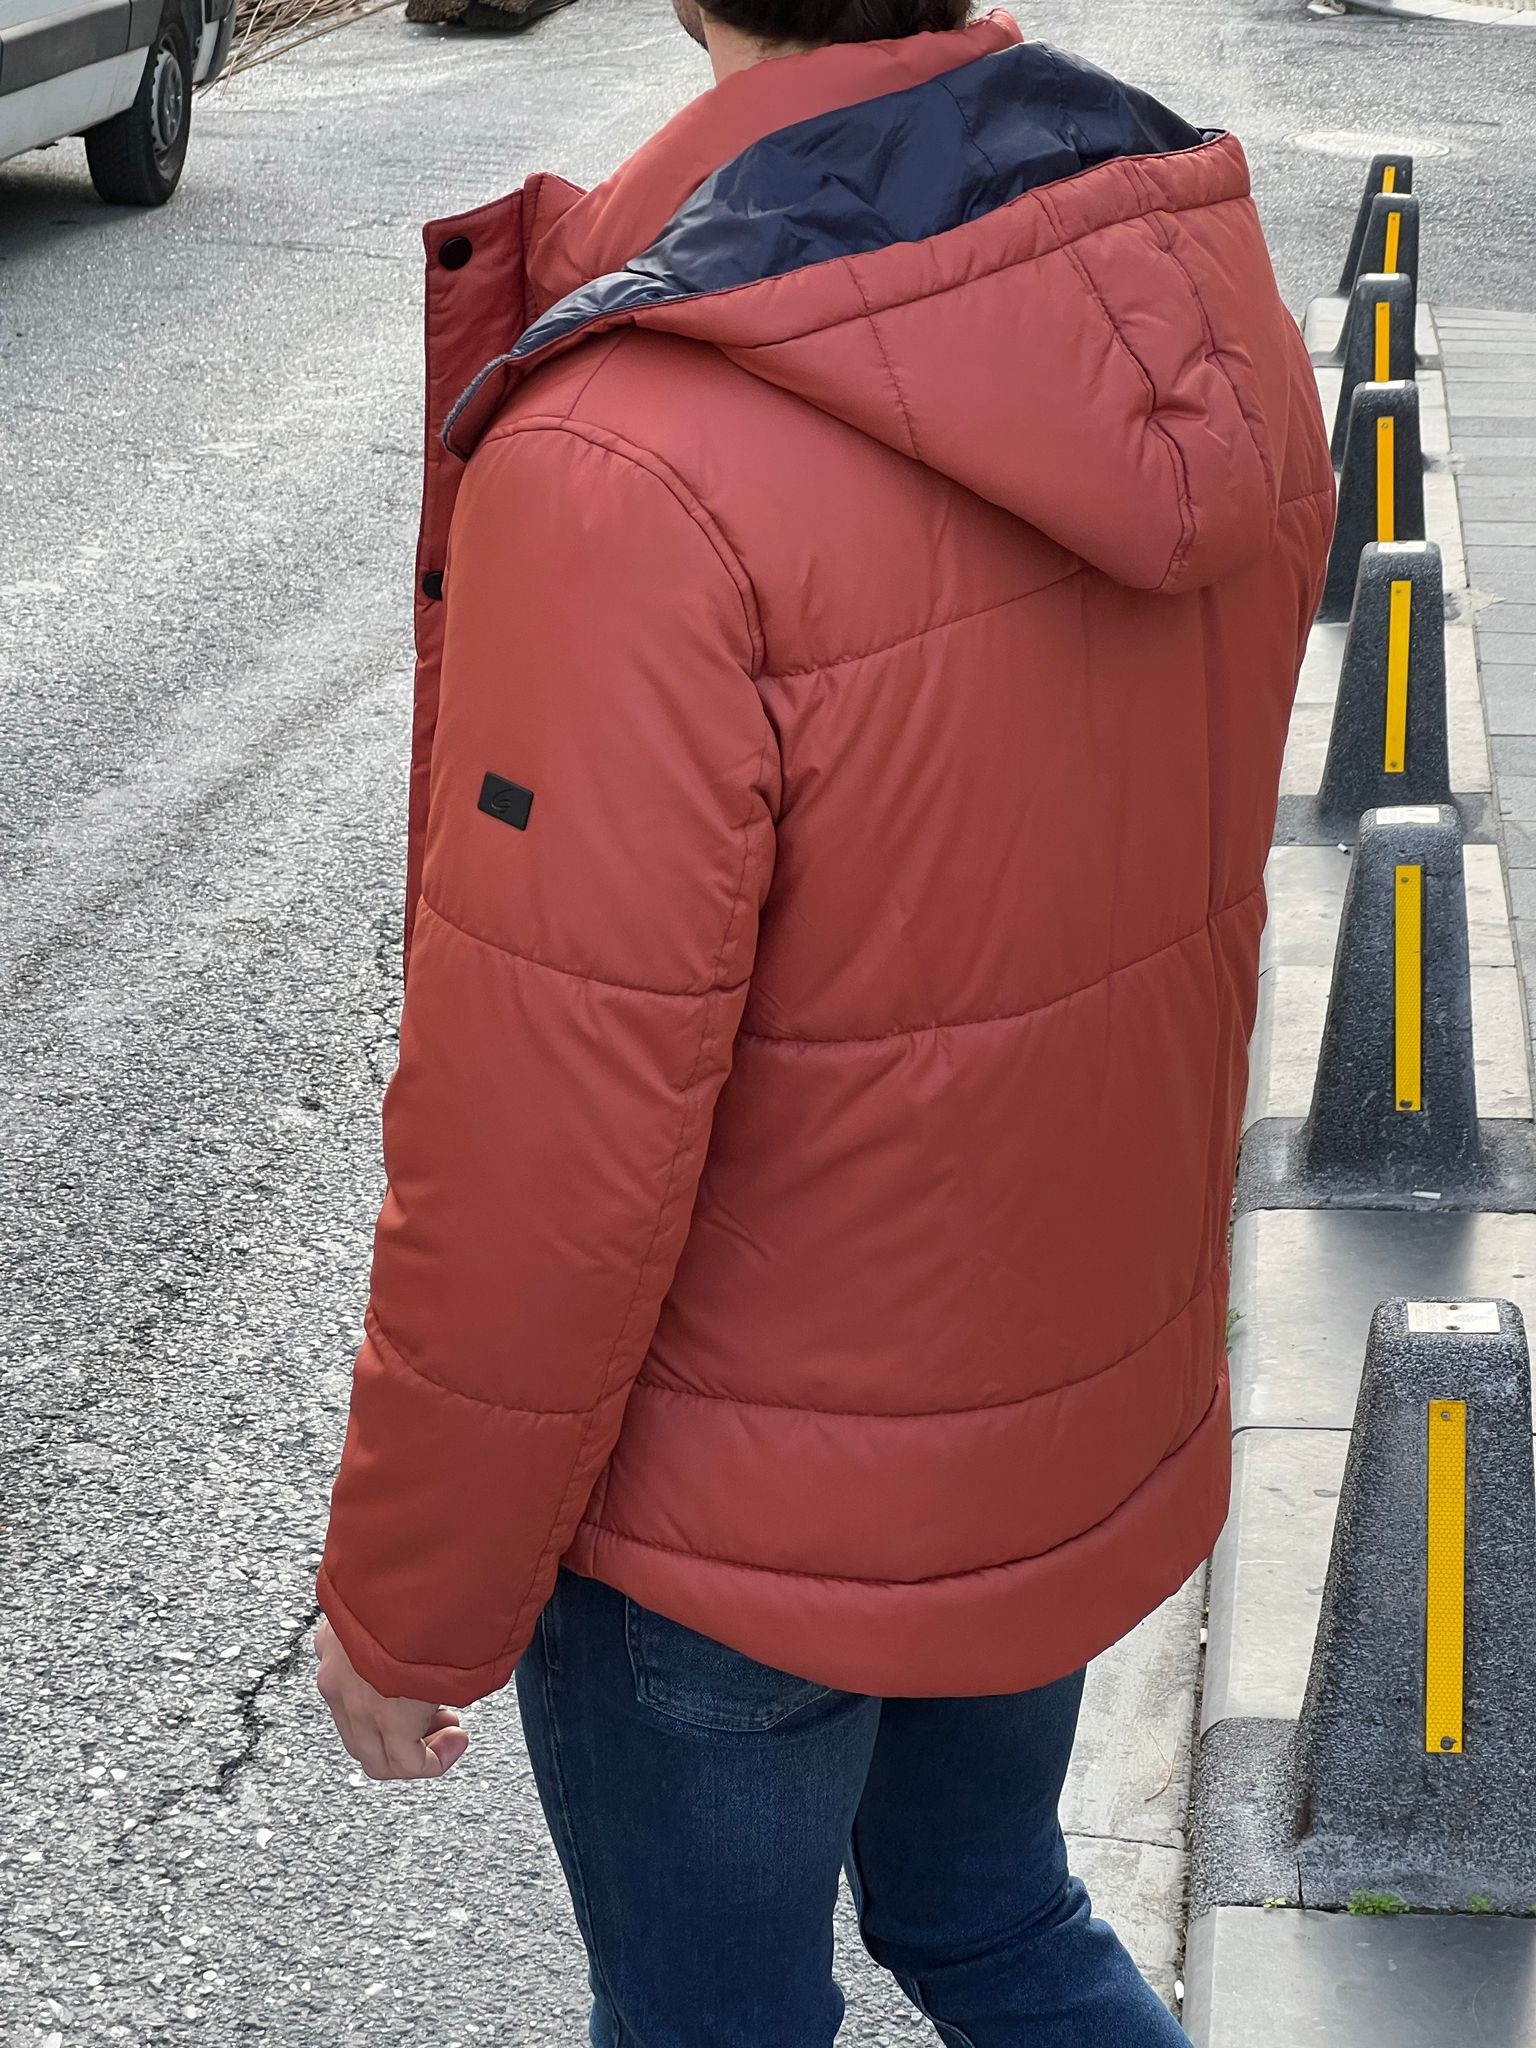 Bold and trendy: our model showcasing an eye-catching orange hooded jacket.